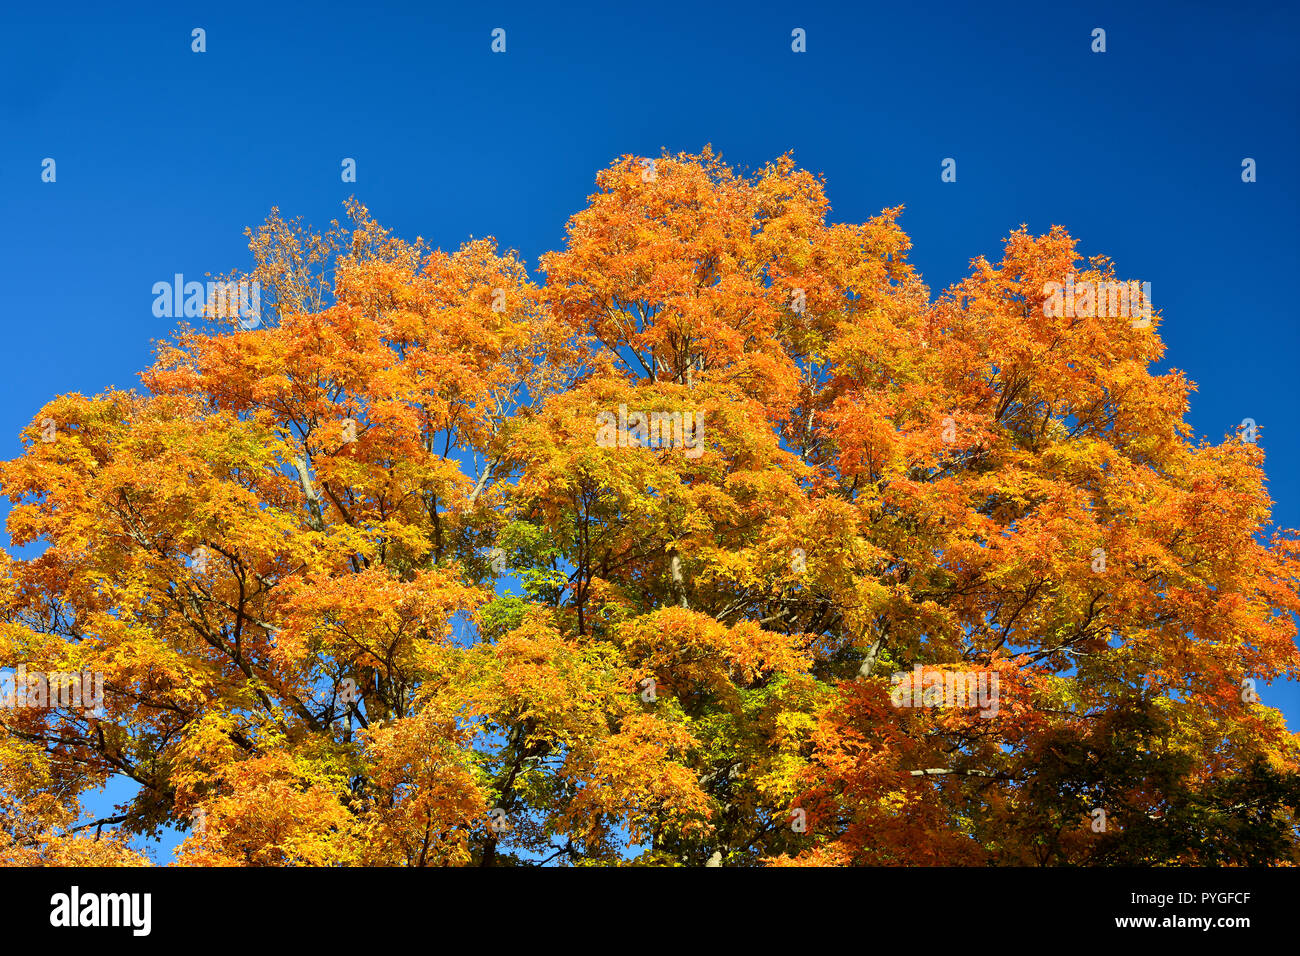 A horizontal image of the top of a large maple tree with its leaves turning the yellows and orange colors of fall against a dark blue sky in Sussex Ne Stock Photo